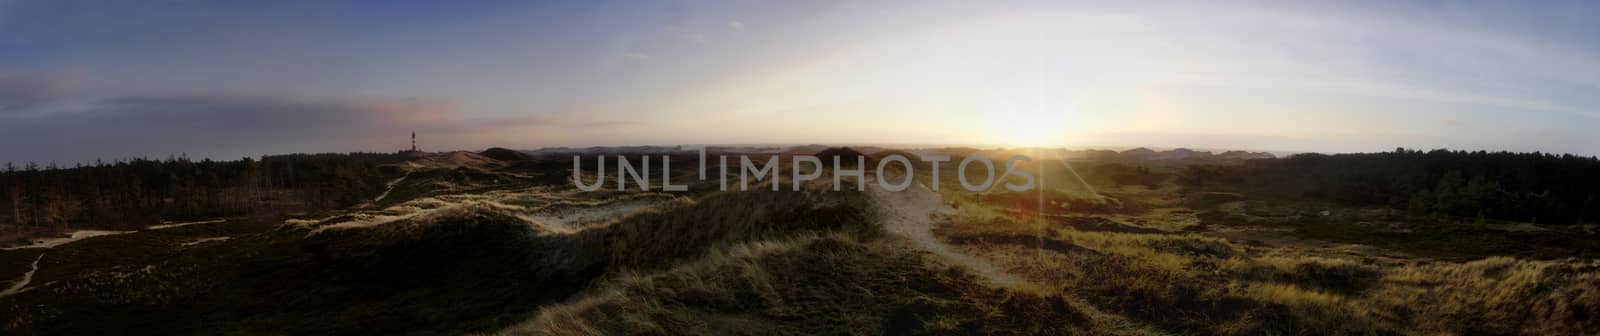 Panorama on Amrum in Germany by 3quarks